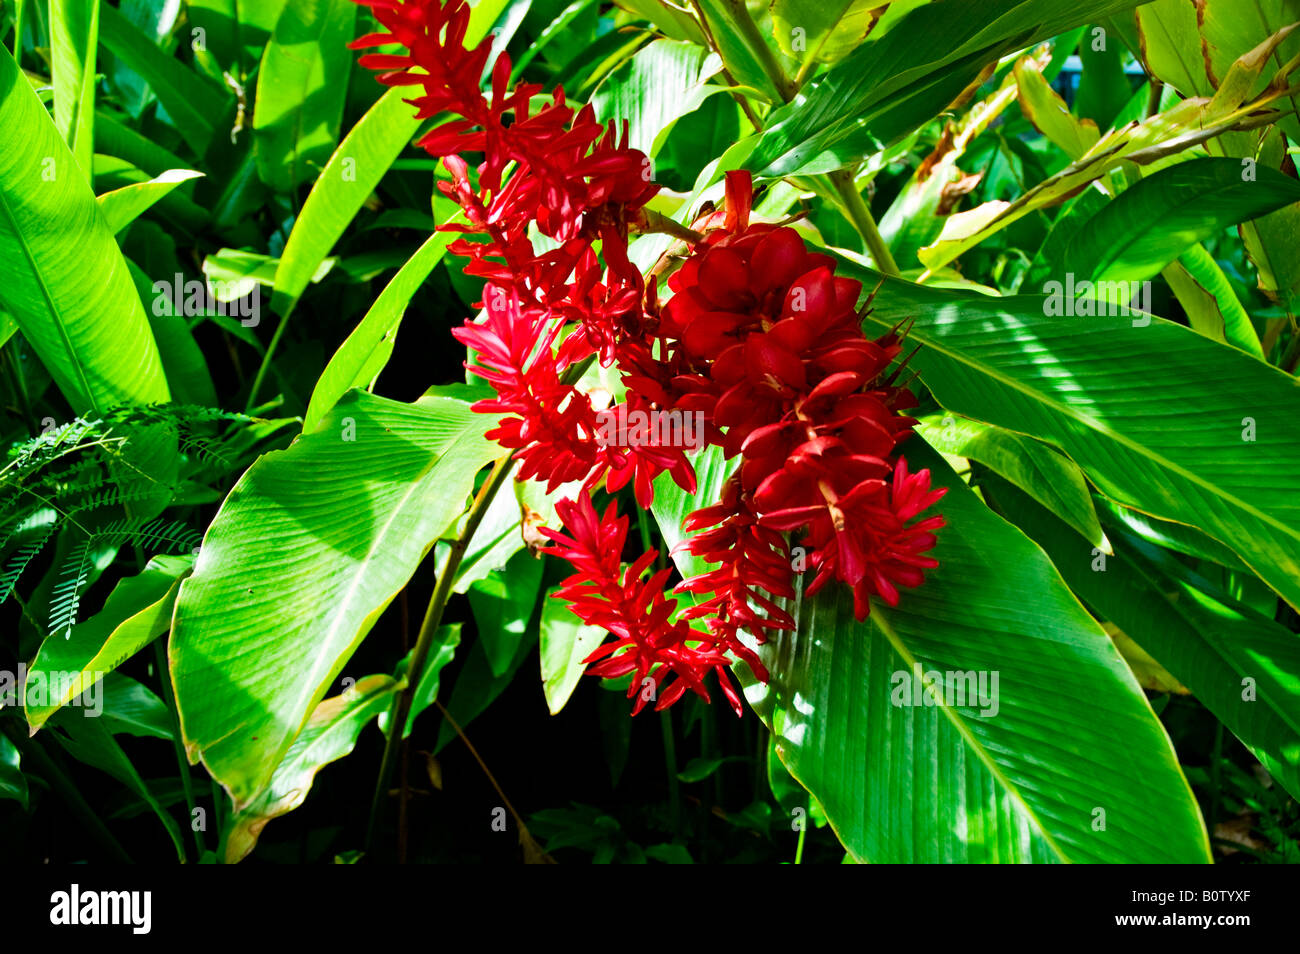 A Red Ginger Lily amid Broad Green Leaves in Andromeda Botanic Gardens, Barbados Stock Photo